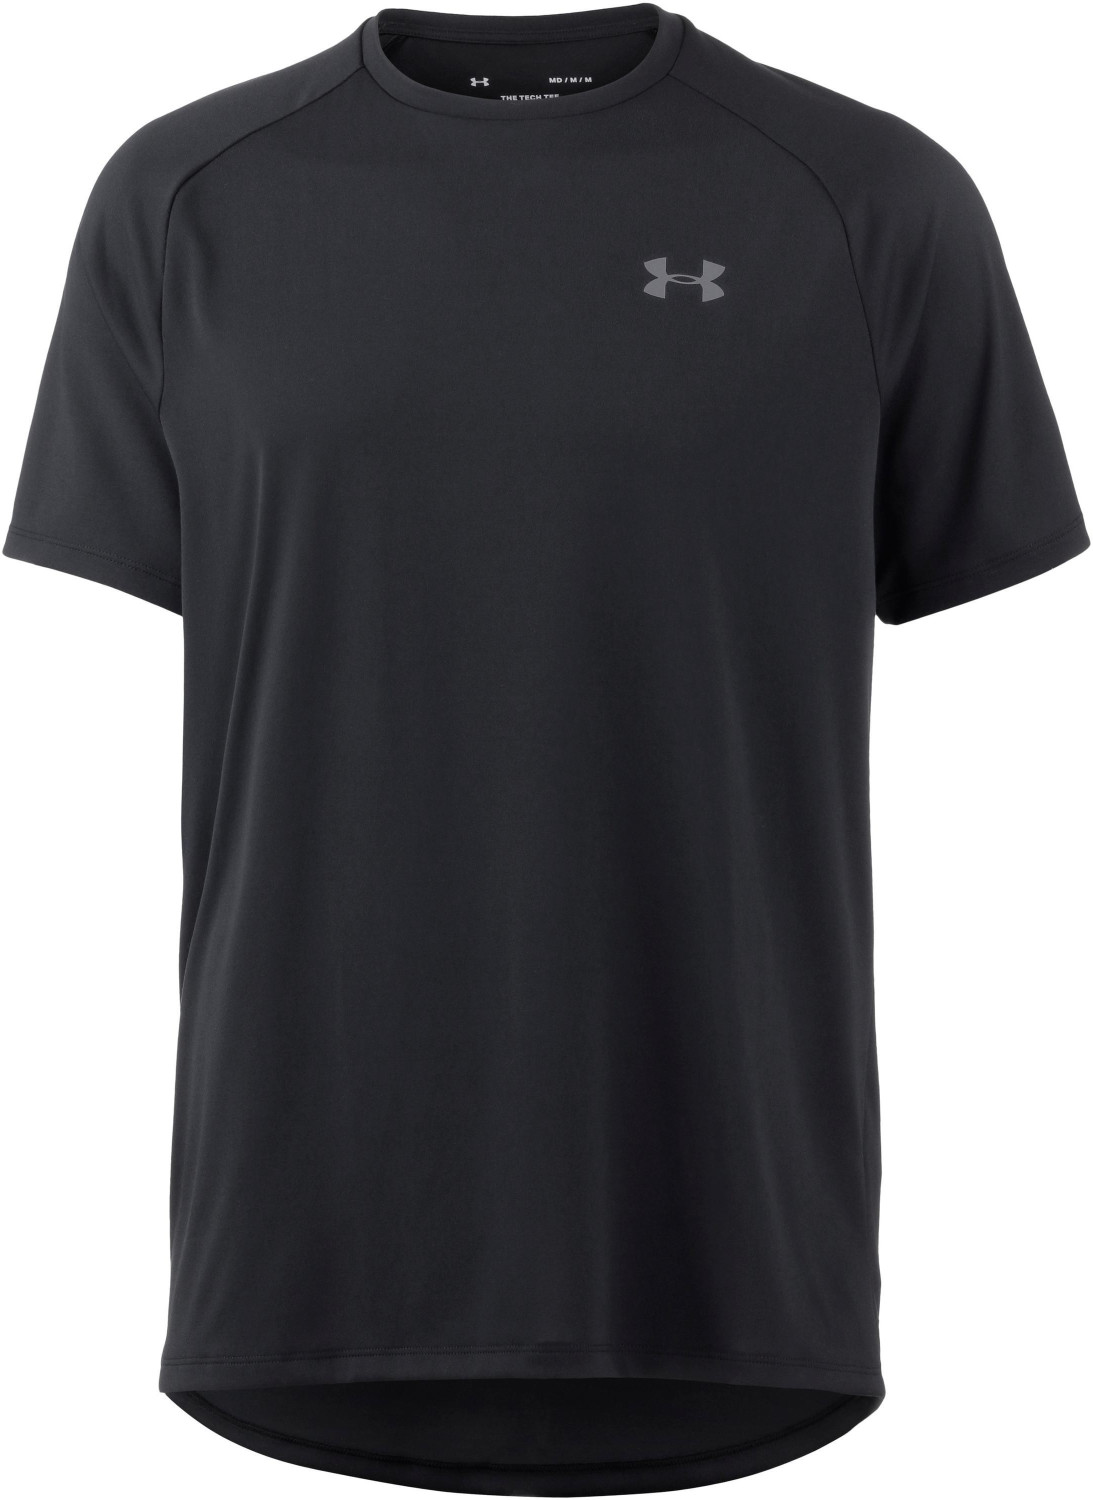 Buy Under Armour UA Tech T-Shirt from £15.94 (Today) – Best Deals on ...